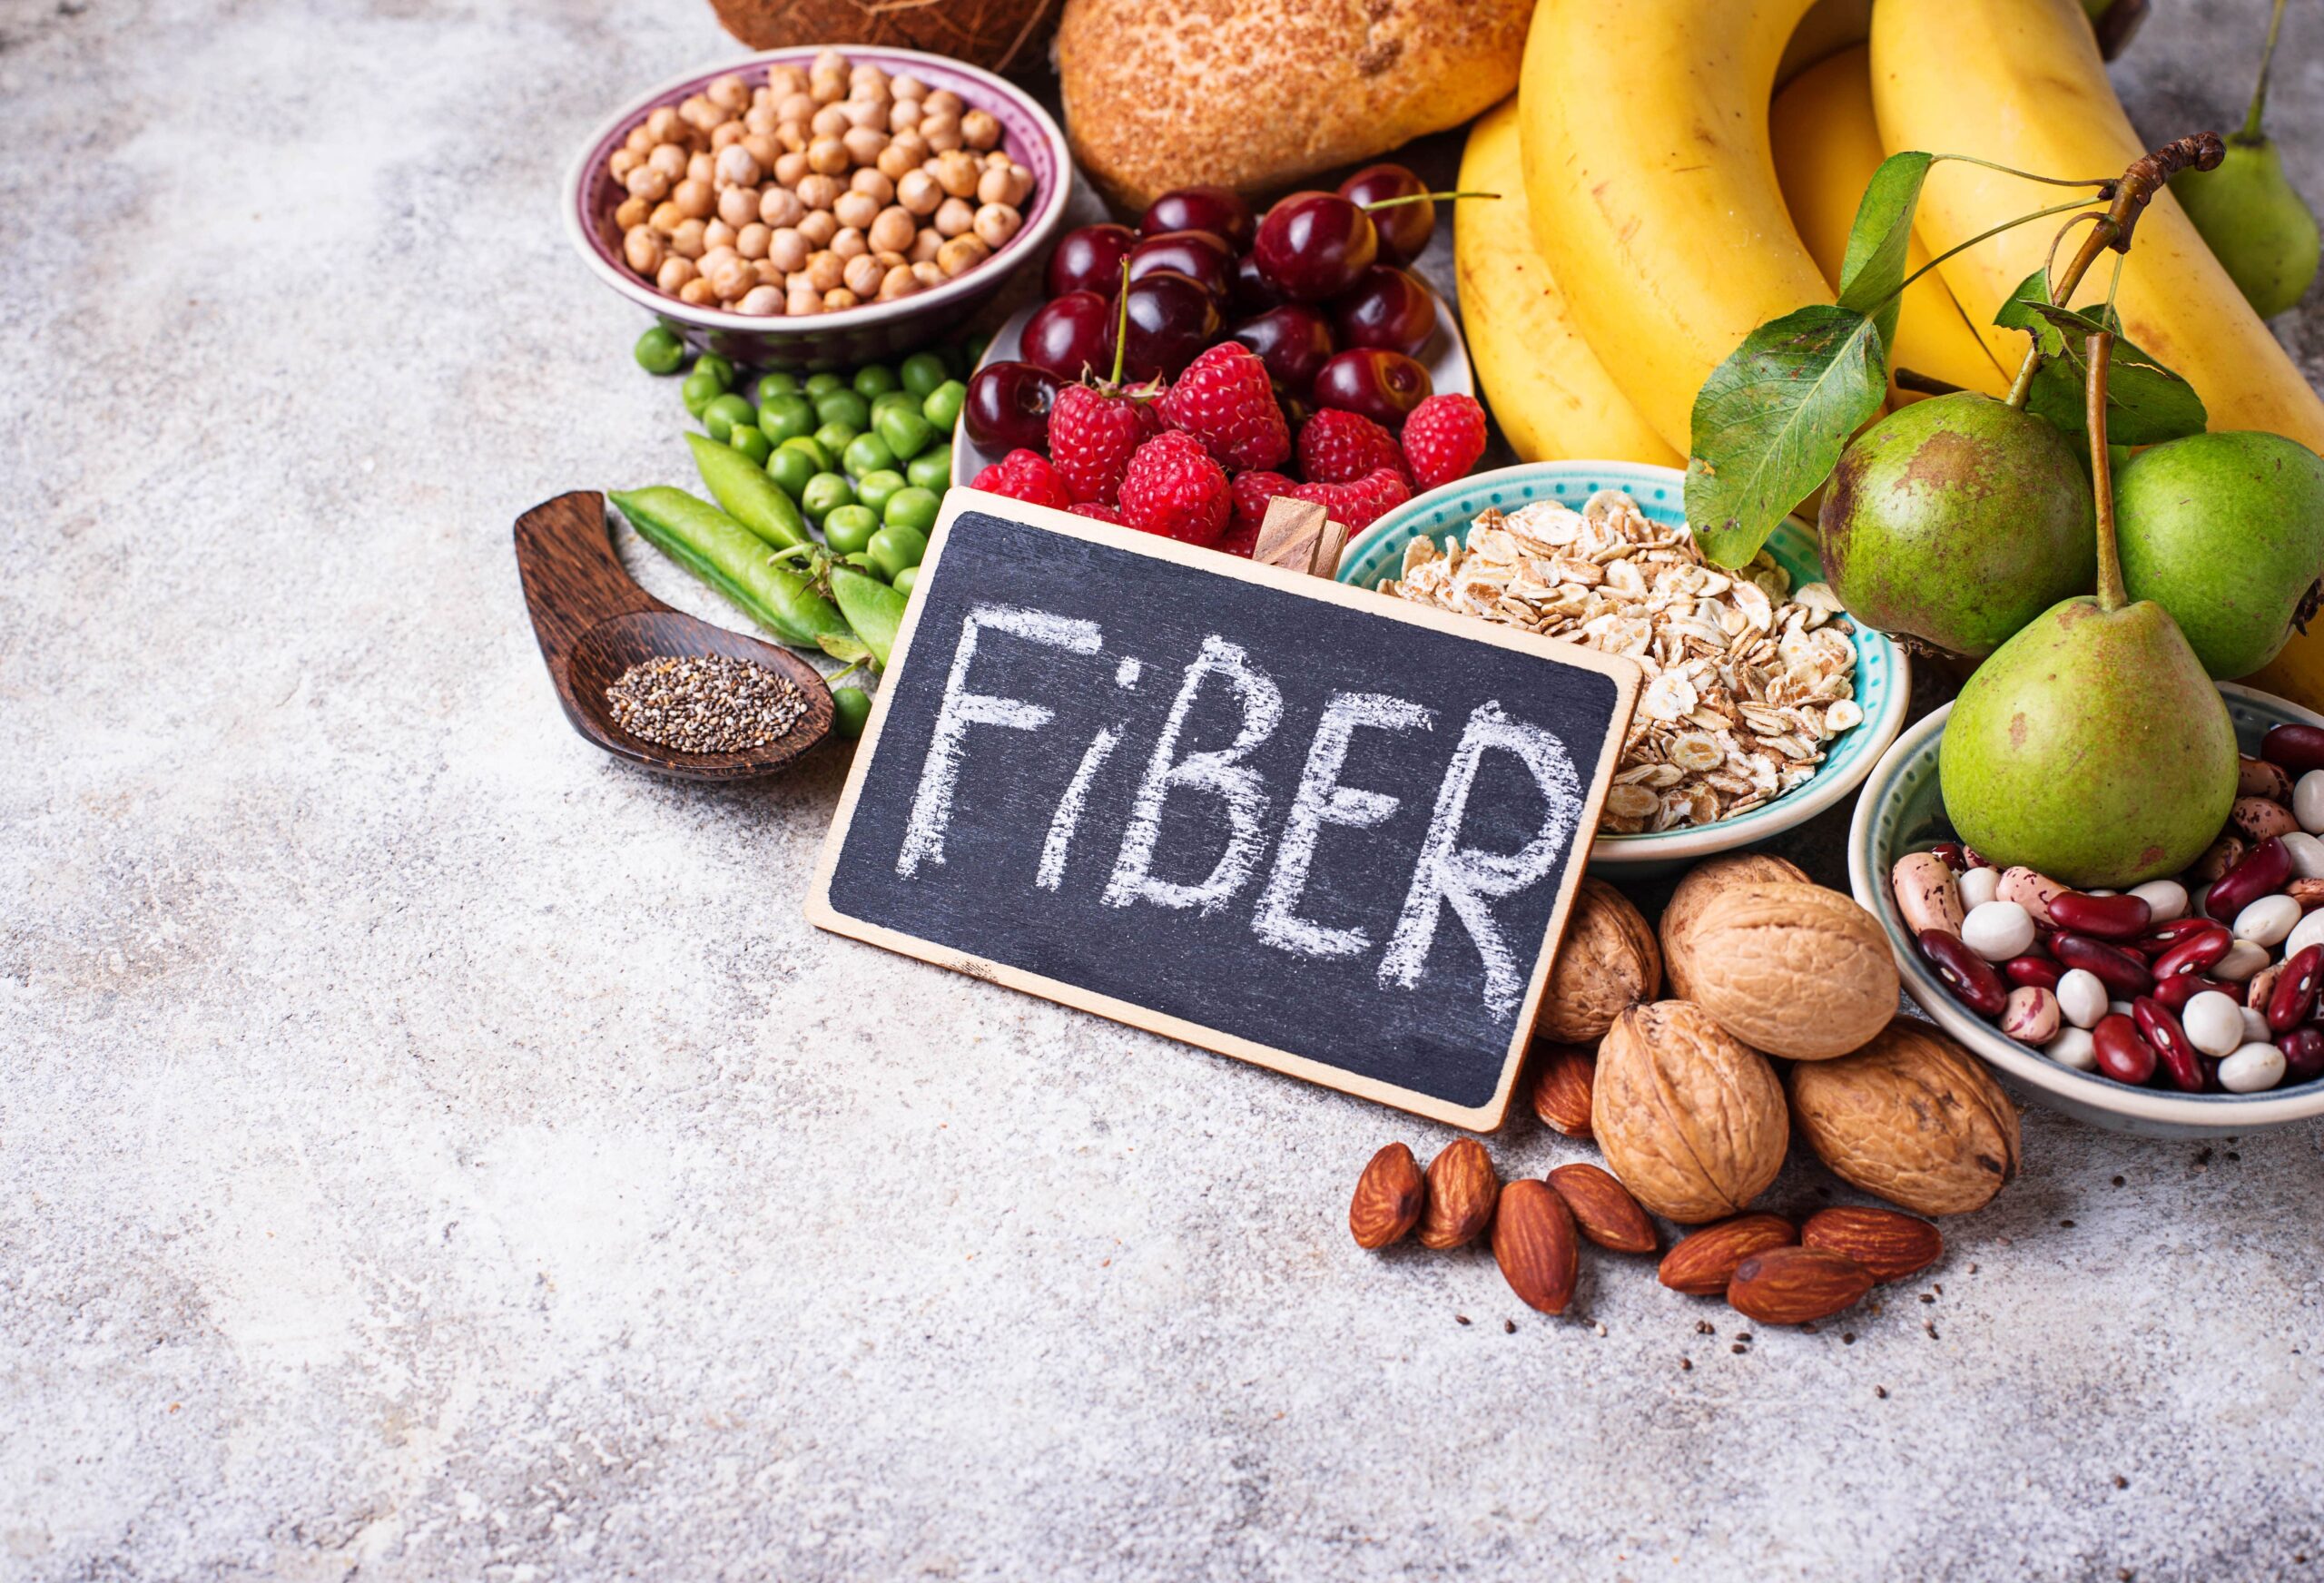 Fruits High in Fiber to Include in Your Diet